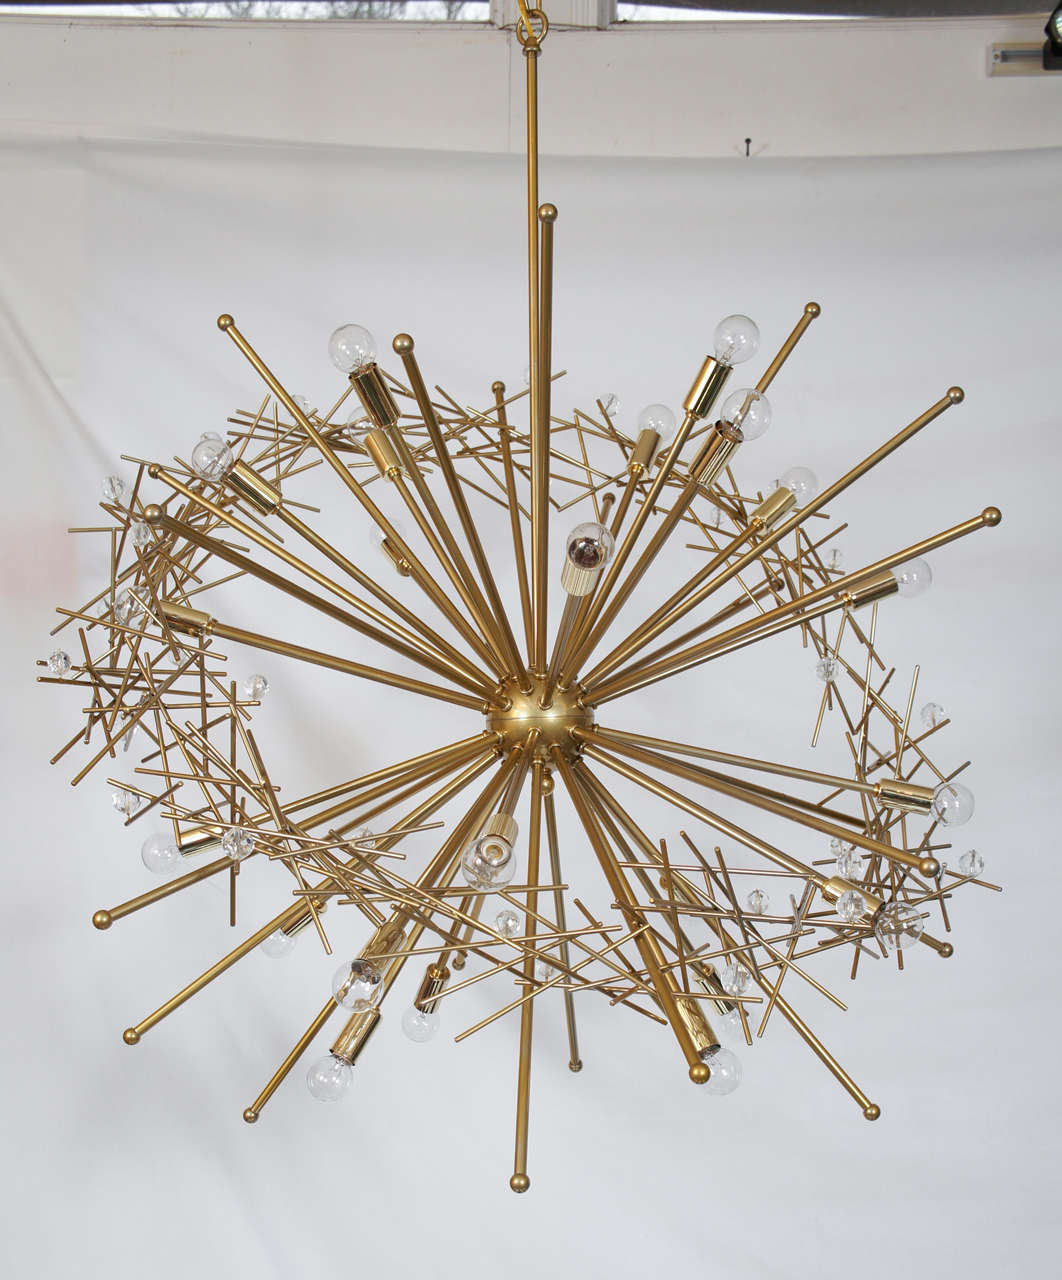 Powder-coated steel chandelier by Lou Blass with 24 lights. With crystal beads scattered throughout the ring. Hand-cut, shaped, and textured by acclaimed artist Lou Blass, then welded by the artist himself.
The entire collection of licensed Lou